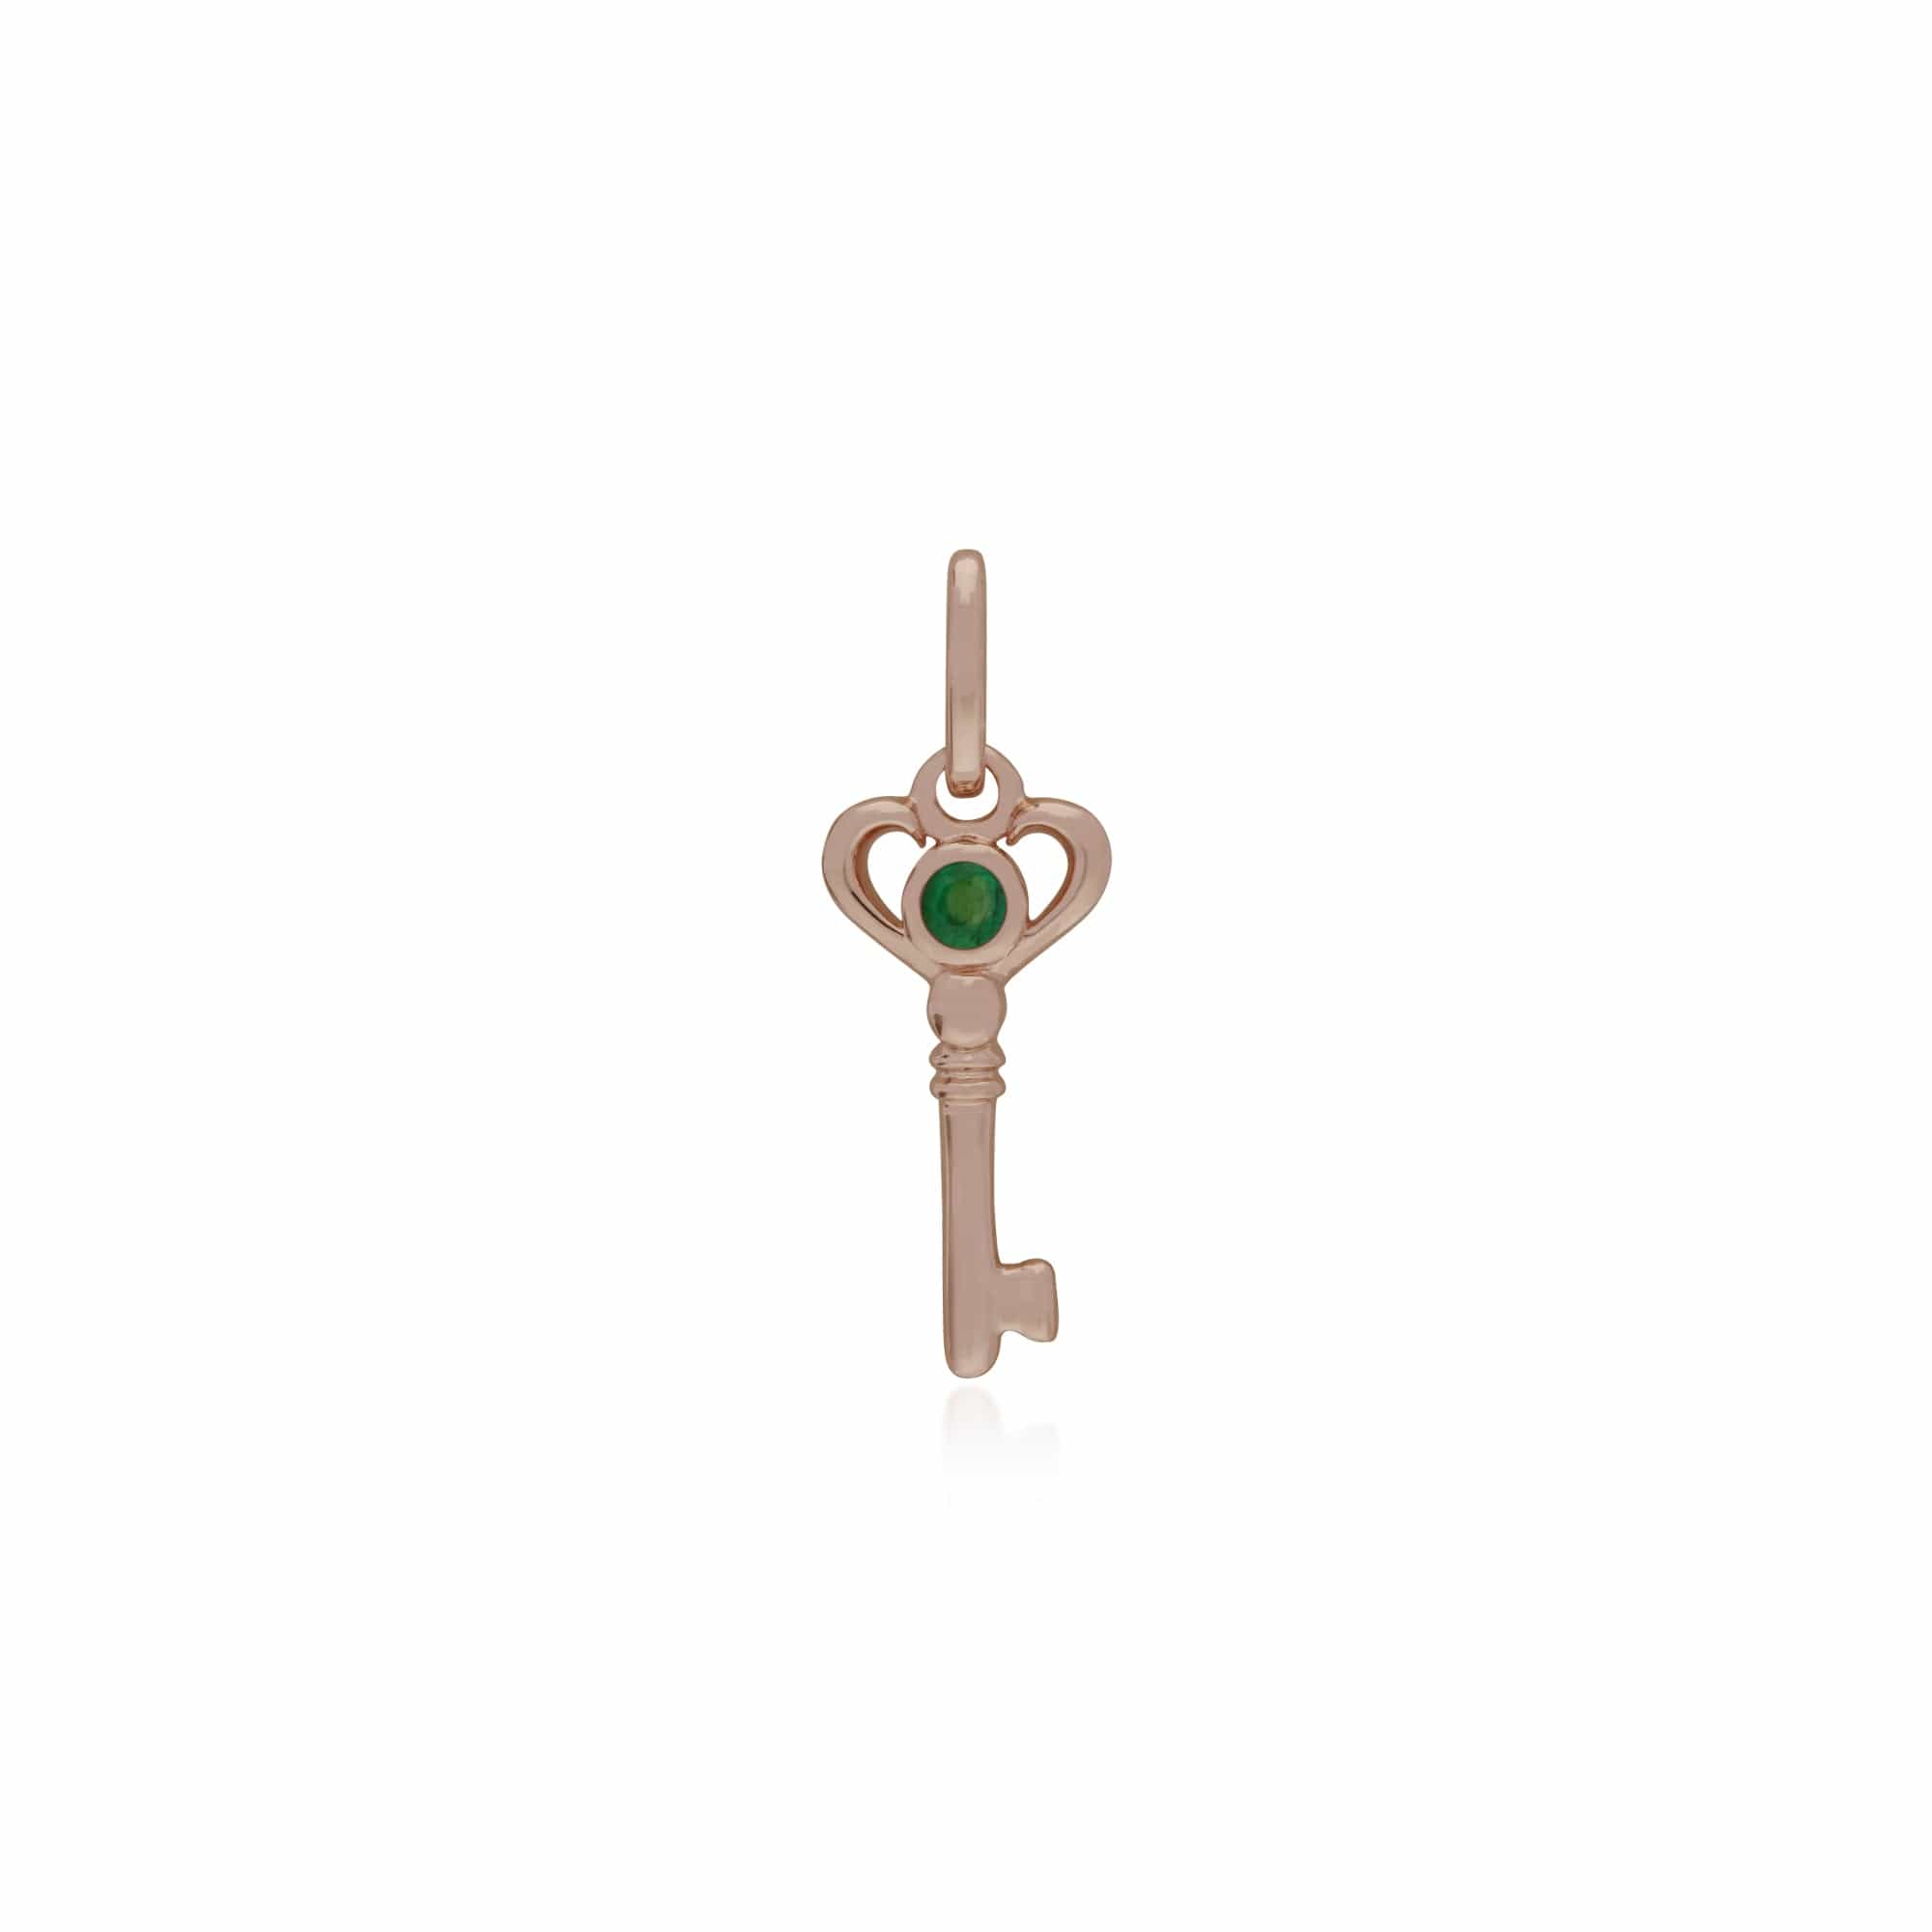 270P026303925-270P026501925 Classic Swirl Heart Lock Pendant & Emerald Key Charm in Rose Gold Plated 925 Sterling Silver 2